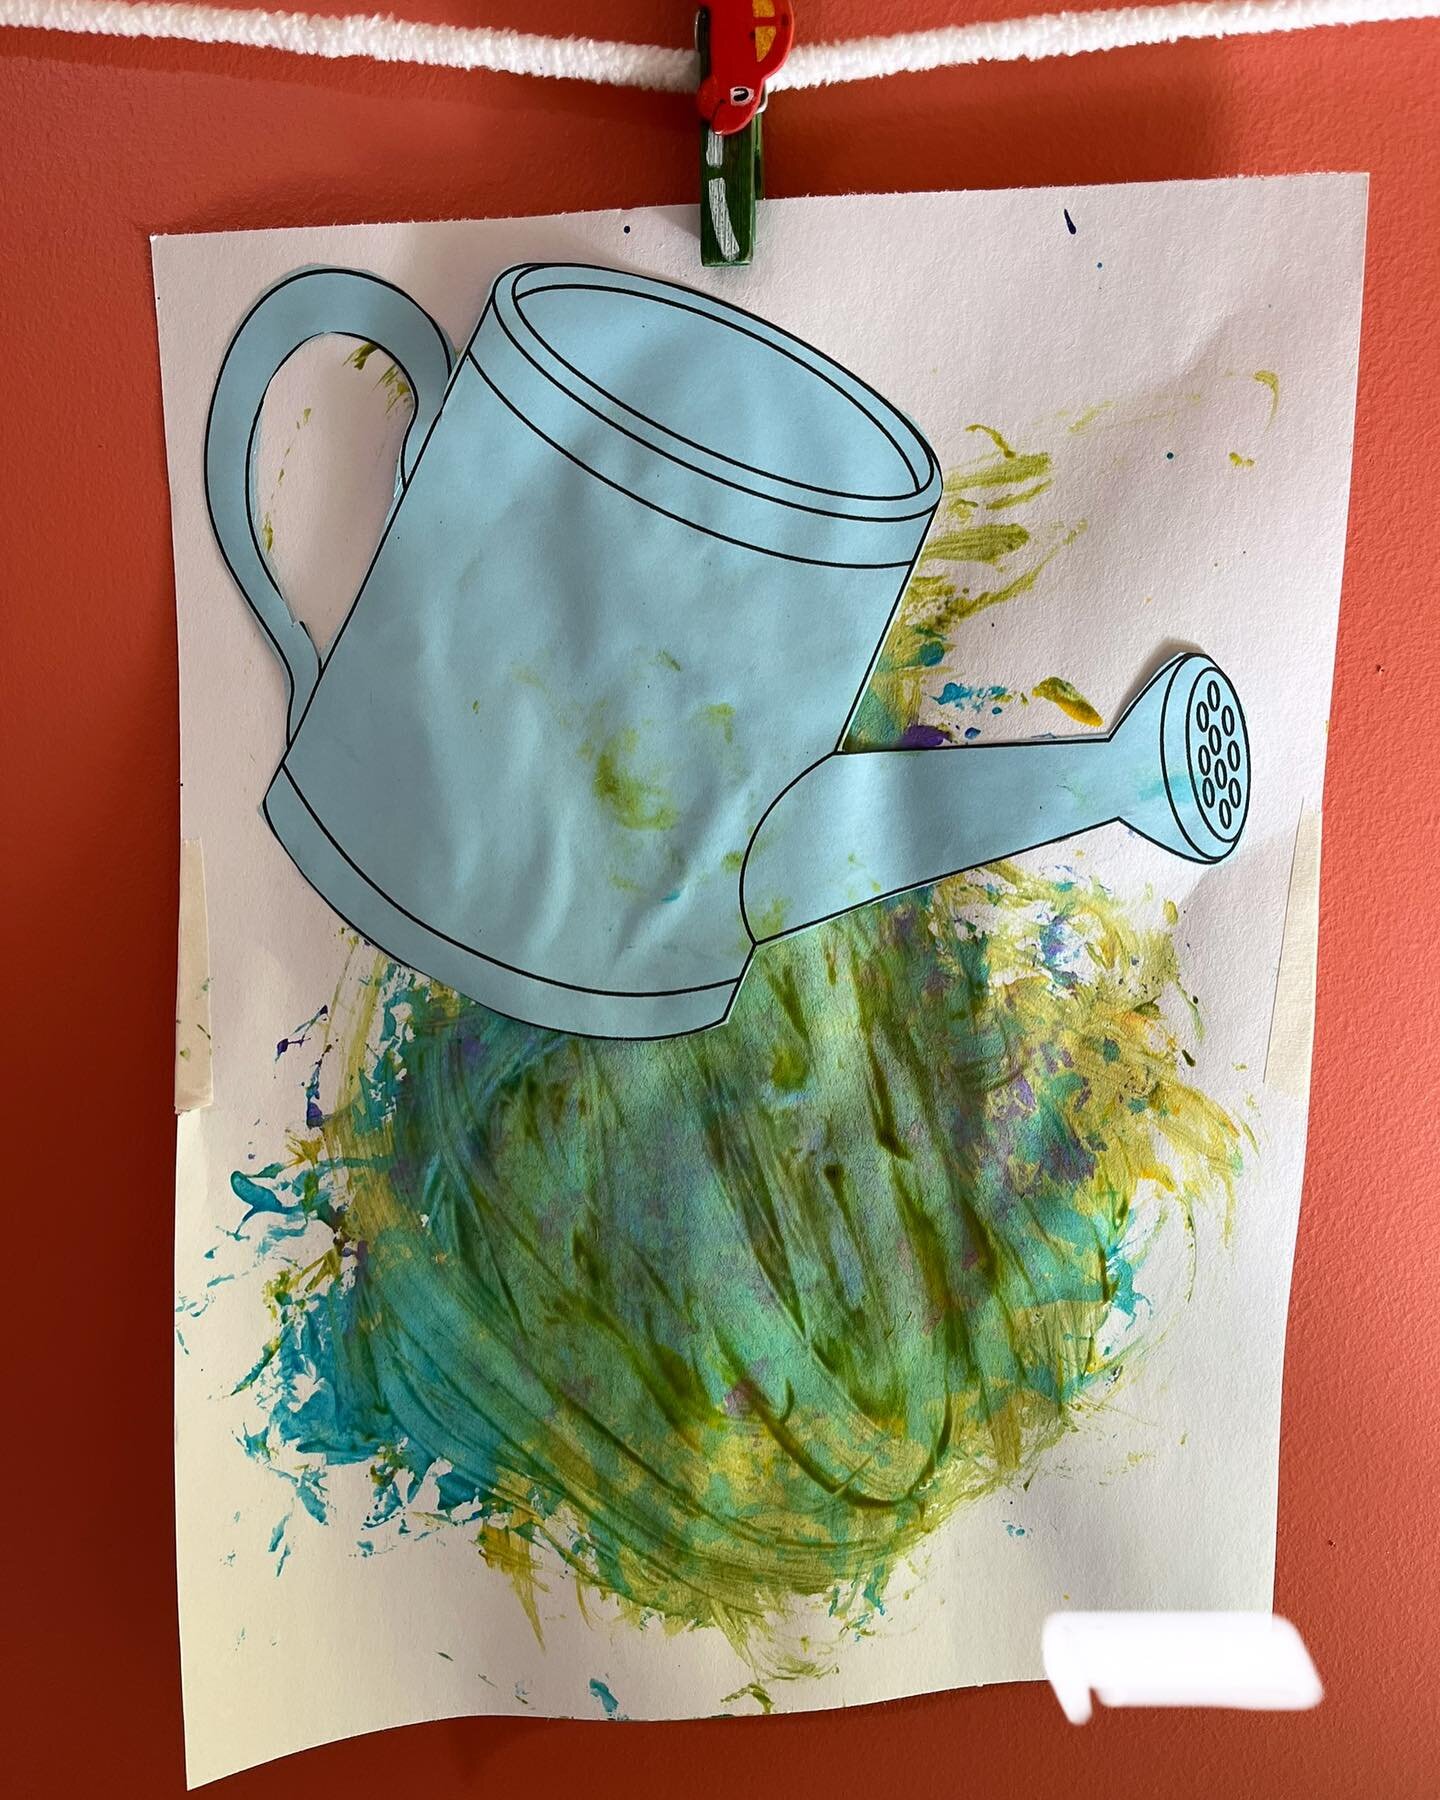 We&rsquo;re having so much fun in our Gardening Unit. Watering can flower painting was a big hit! 

#tigerlilypreschool #seattlepreschool #gardeningunit #preschoolart #northseattlepreschool #halfdaypreschool #painting 

Now enrolling for the 2024-25 